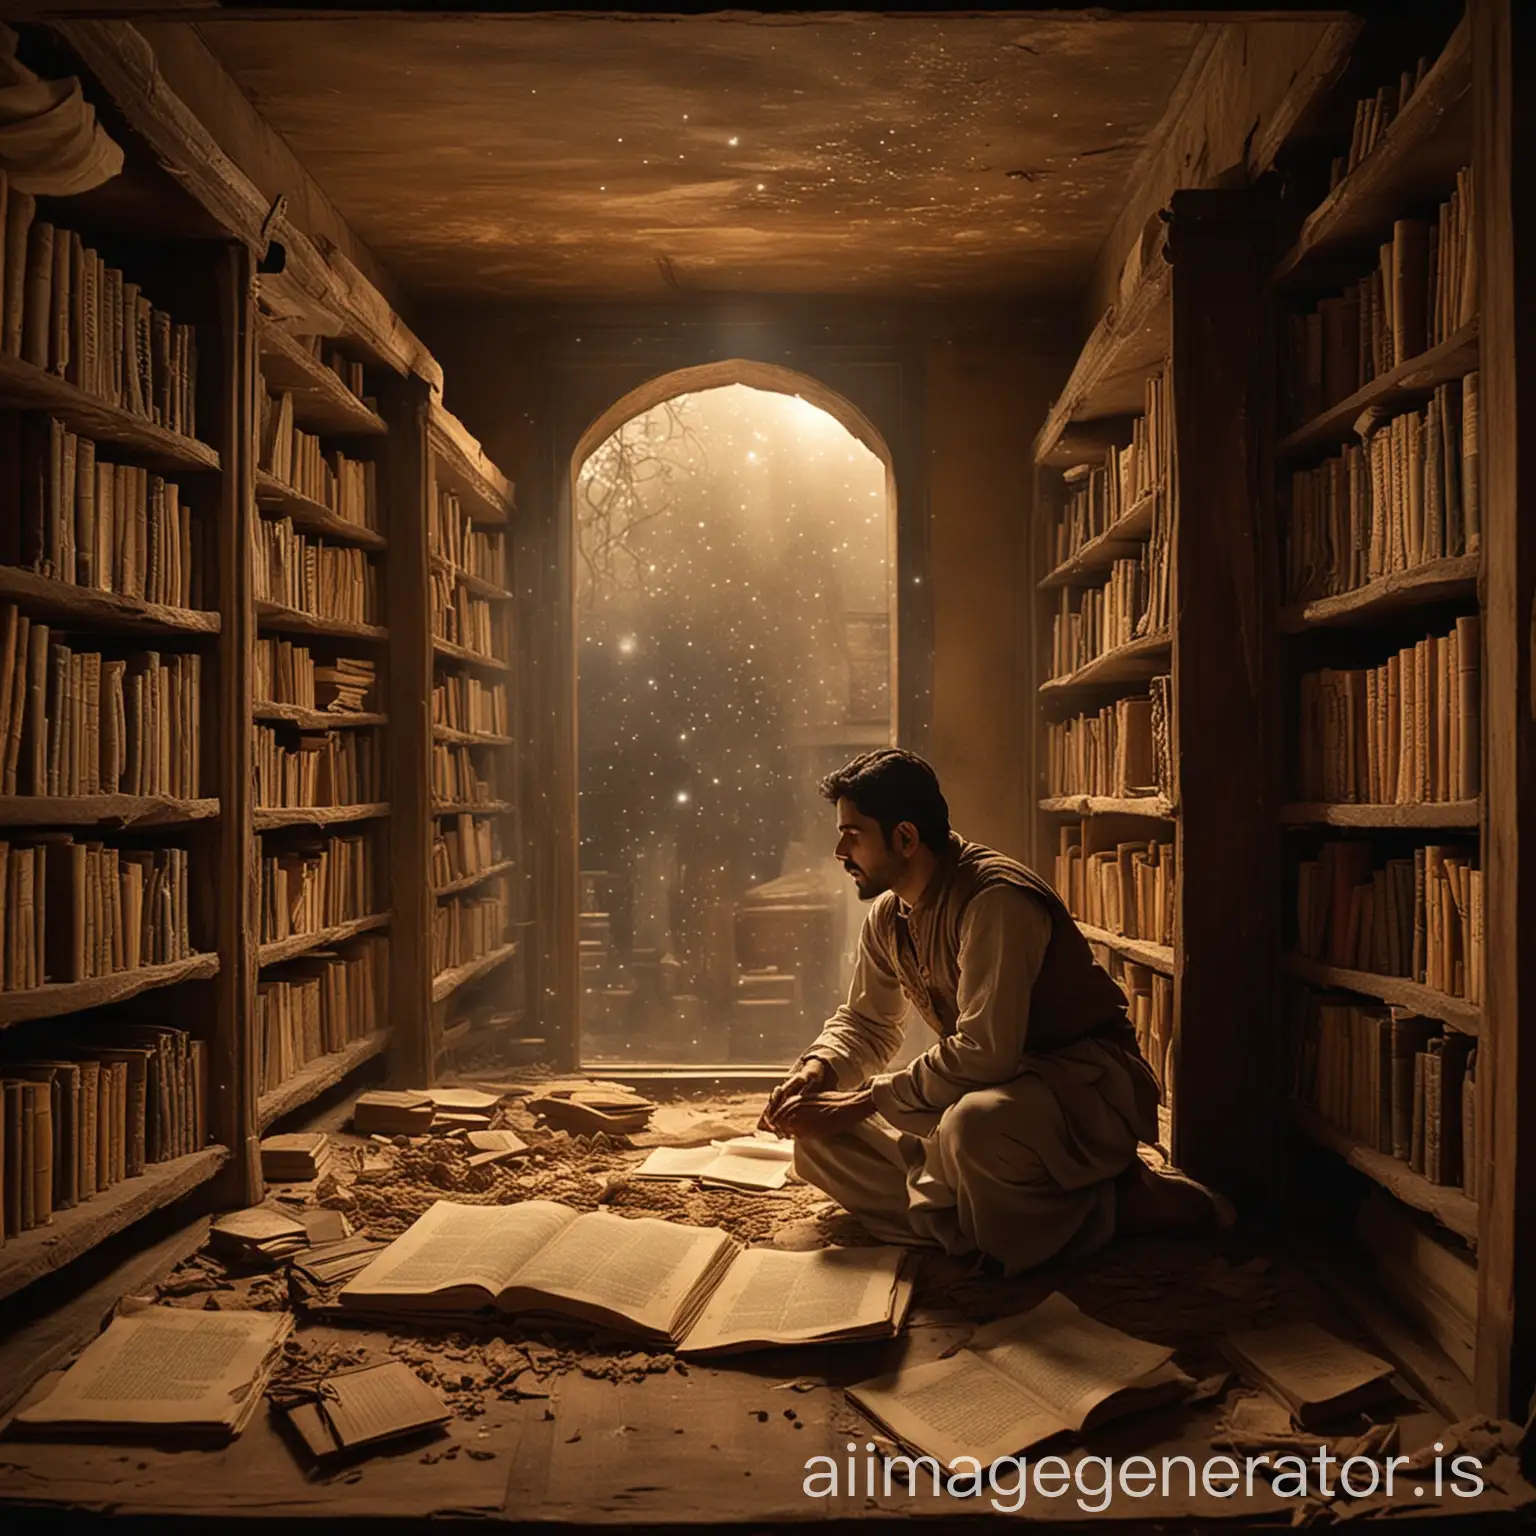 In the dimly lit interior of the forgotten bookstore, shafts of sunlight filter through the dusty air, casting ethereal beams that illuminate the worn wooden shelves lined with ancient tomes. Aamir, bathed in the soft golden light, stands amidst the maze of books, his eyes alight with curiosity as he reaches out to touch the weathered spine of a leather-bound volume.

The atmosphere is hushed, save for the gentle rustle of pages and the occasional creak of floorboards beneath Aamir's feet. Books of every shape and size crowd the shelves, their faded covers hinting at the countless stories they hold within their pages.

In the corner of the room, partially obscured by shadows, Aamir discovers the object of his fascination: a weathered manuscript, its delicate pages yellowed with age and its intricate script barely legible. With trembling hands, he reaches out to lift the parchment from its resting place, sending clouds of dust swirling into the air like tiny constellations.

As Aamir gingerly turns the pages, his eyes widen in wonder at the faded illustrations that adorn the manuscript's margins—scenes of distant lands, mystical creatures, and ancient scholars engaged in fervent debate. Each image tells a story of its own, whispering secrets of a bygone era to anyone who dares to listen.

In this moment, time seems to stand still, as Aamir loses himself in the spellbinding world contained within the pages of the manuscript. His heart races with excitement, for he knows that he has stumbled upon a treasure beyond price—a window into the past, waiting to be unlocked by his insatiable thirst for knowledge.